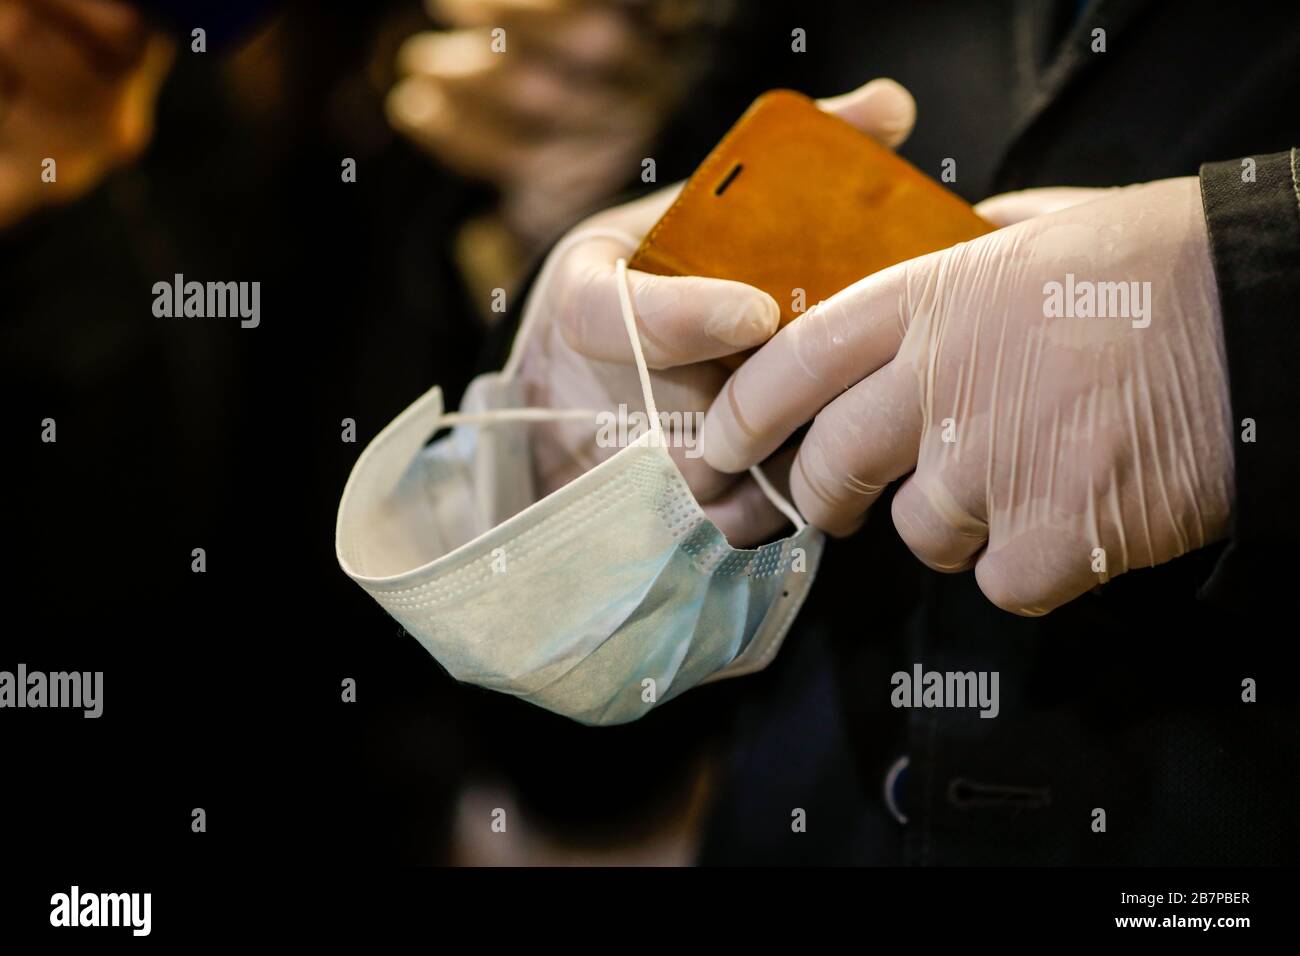 Details with the hands of a man in surgical gloves holding a mobile phone and a face mask to prevent the COVID-19 spread. Stock Photo